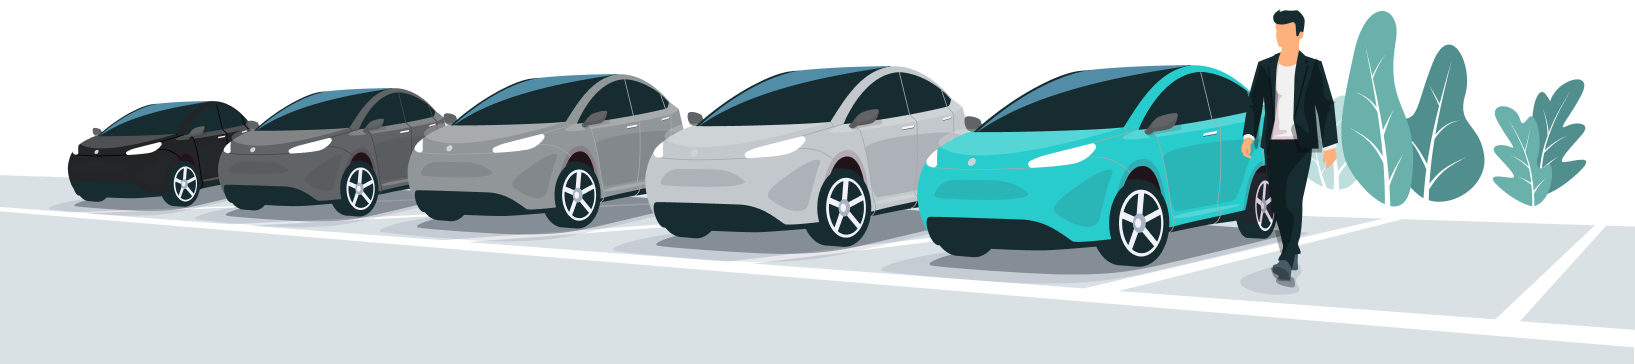 Illustration of cars on a parking lot